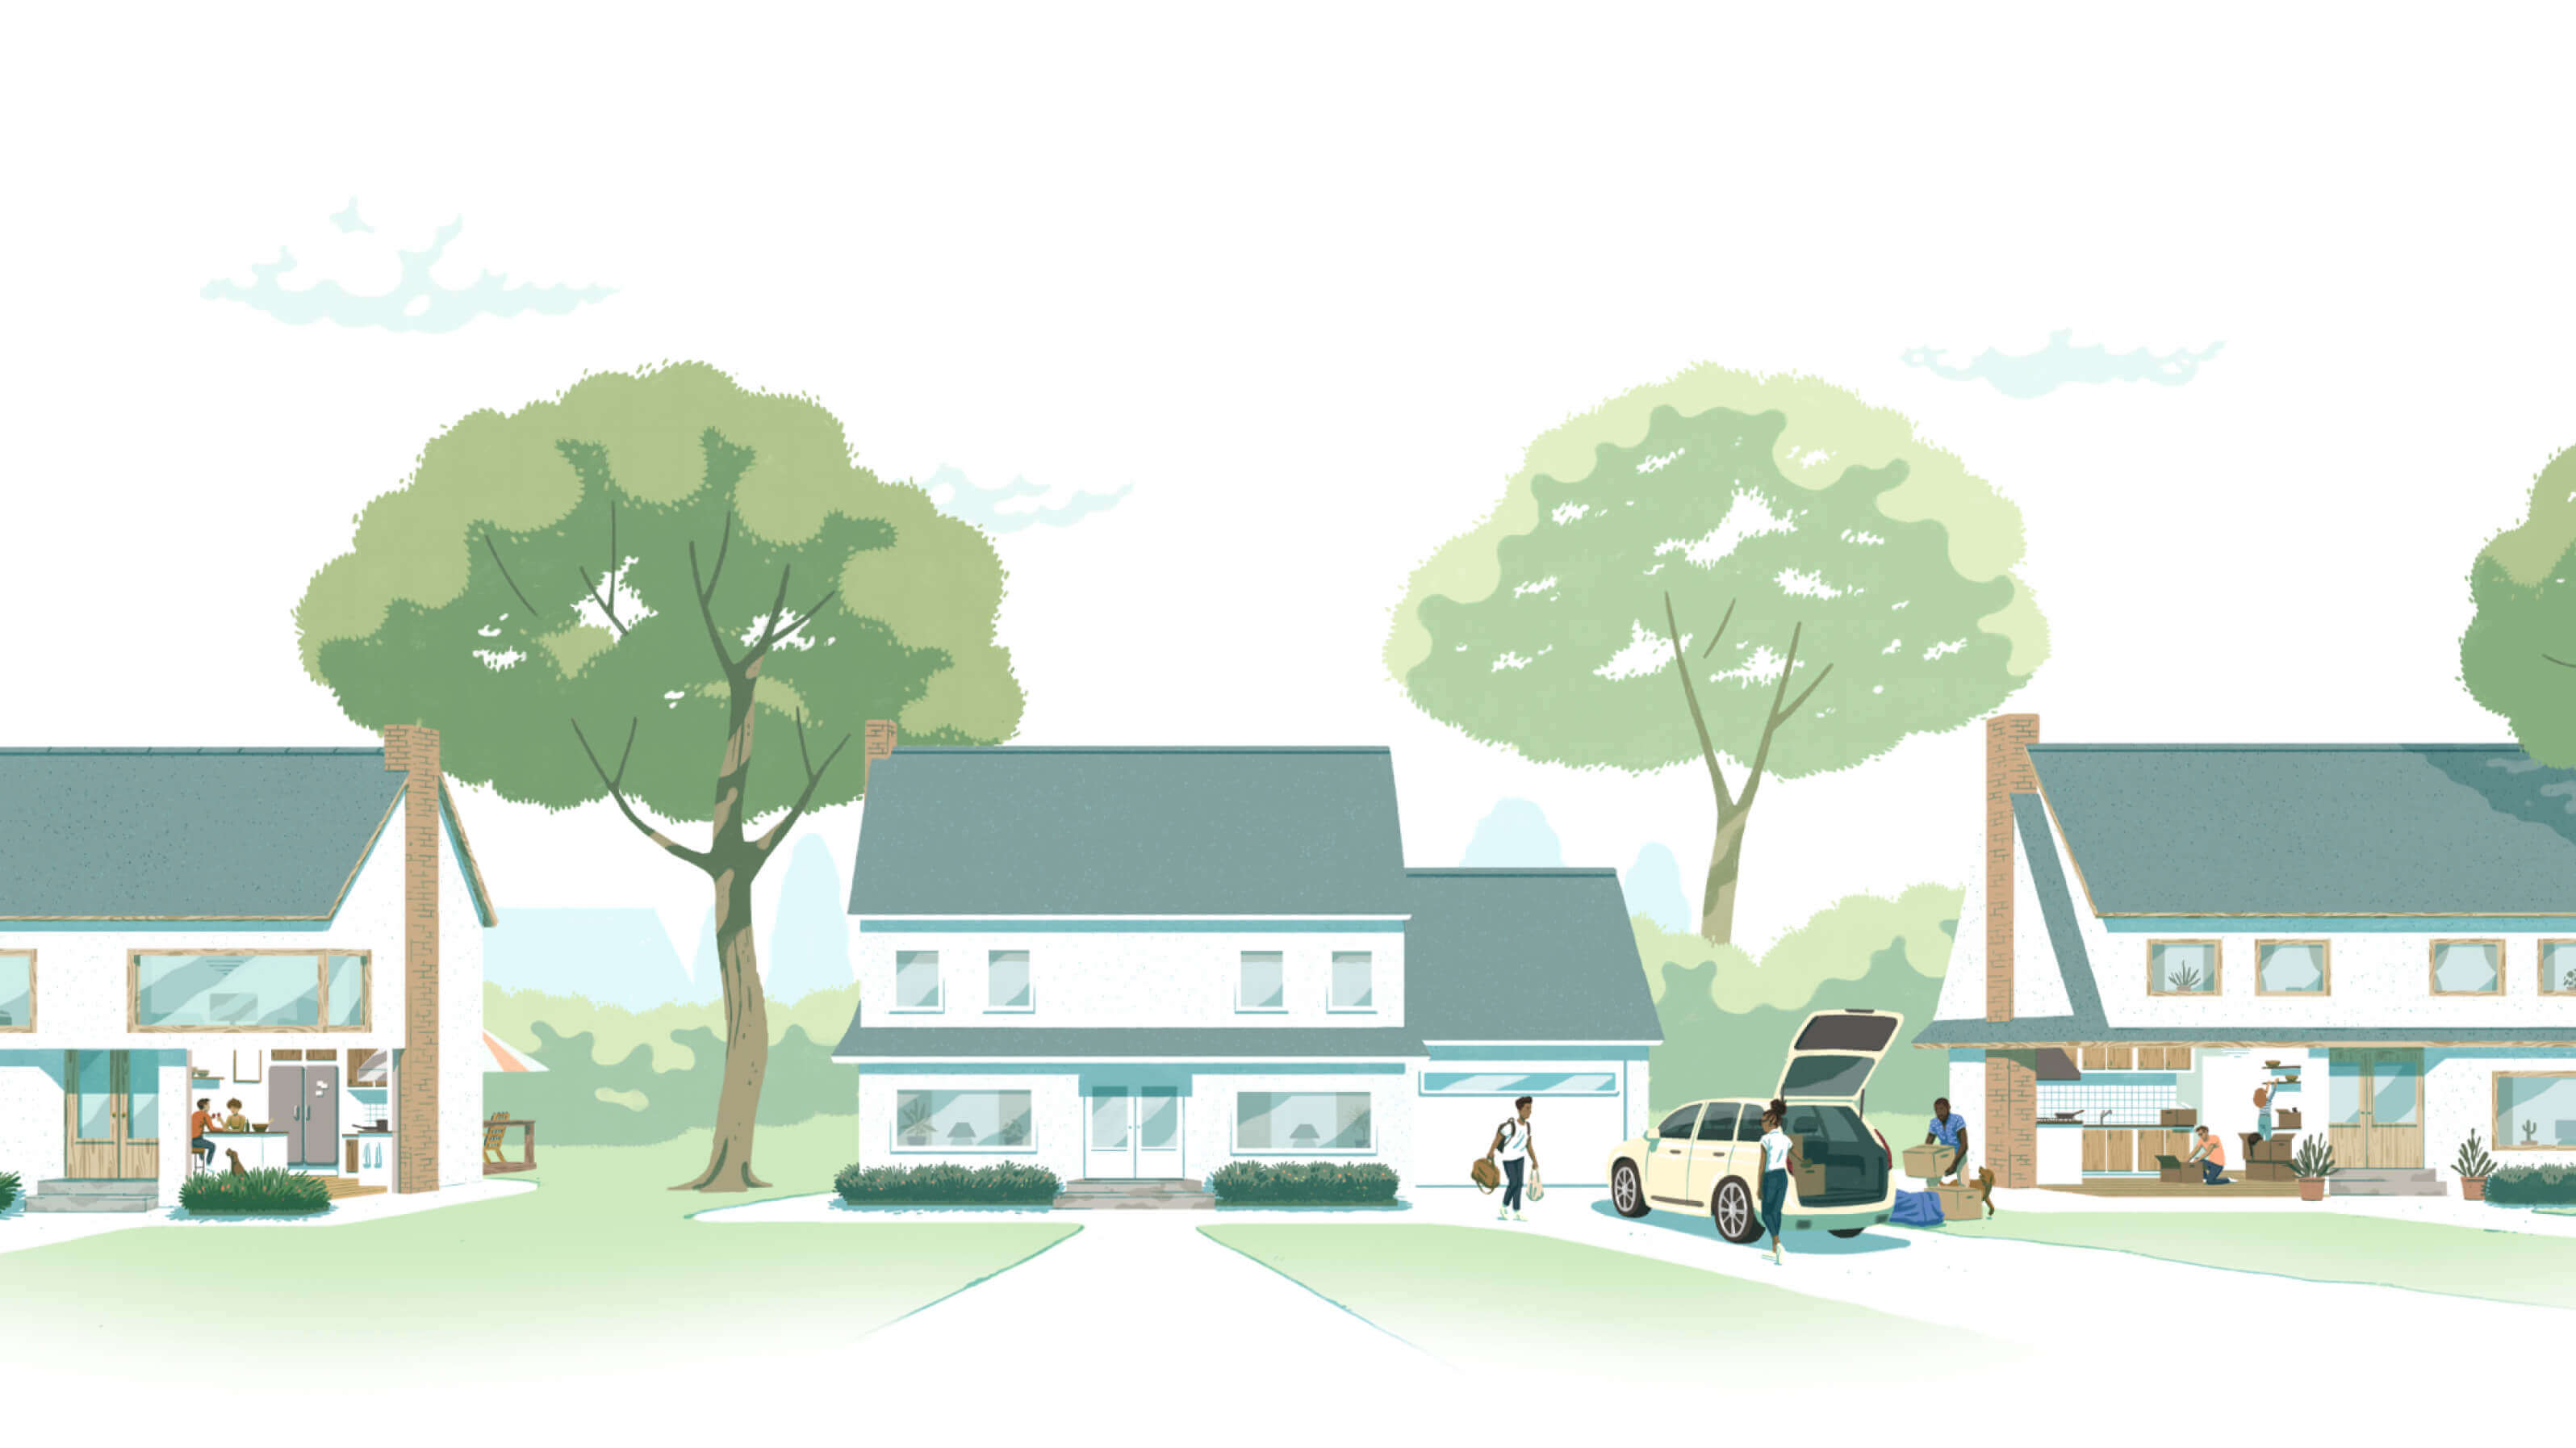 Illustration of homes and people in a suburban neighborhood